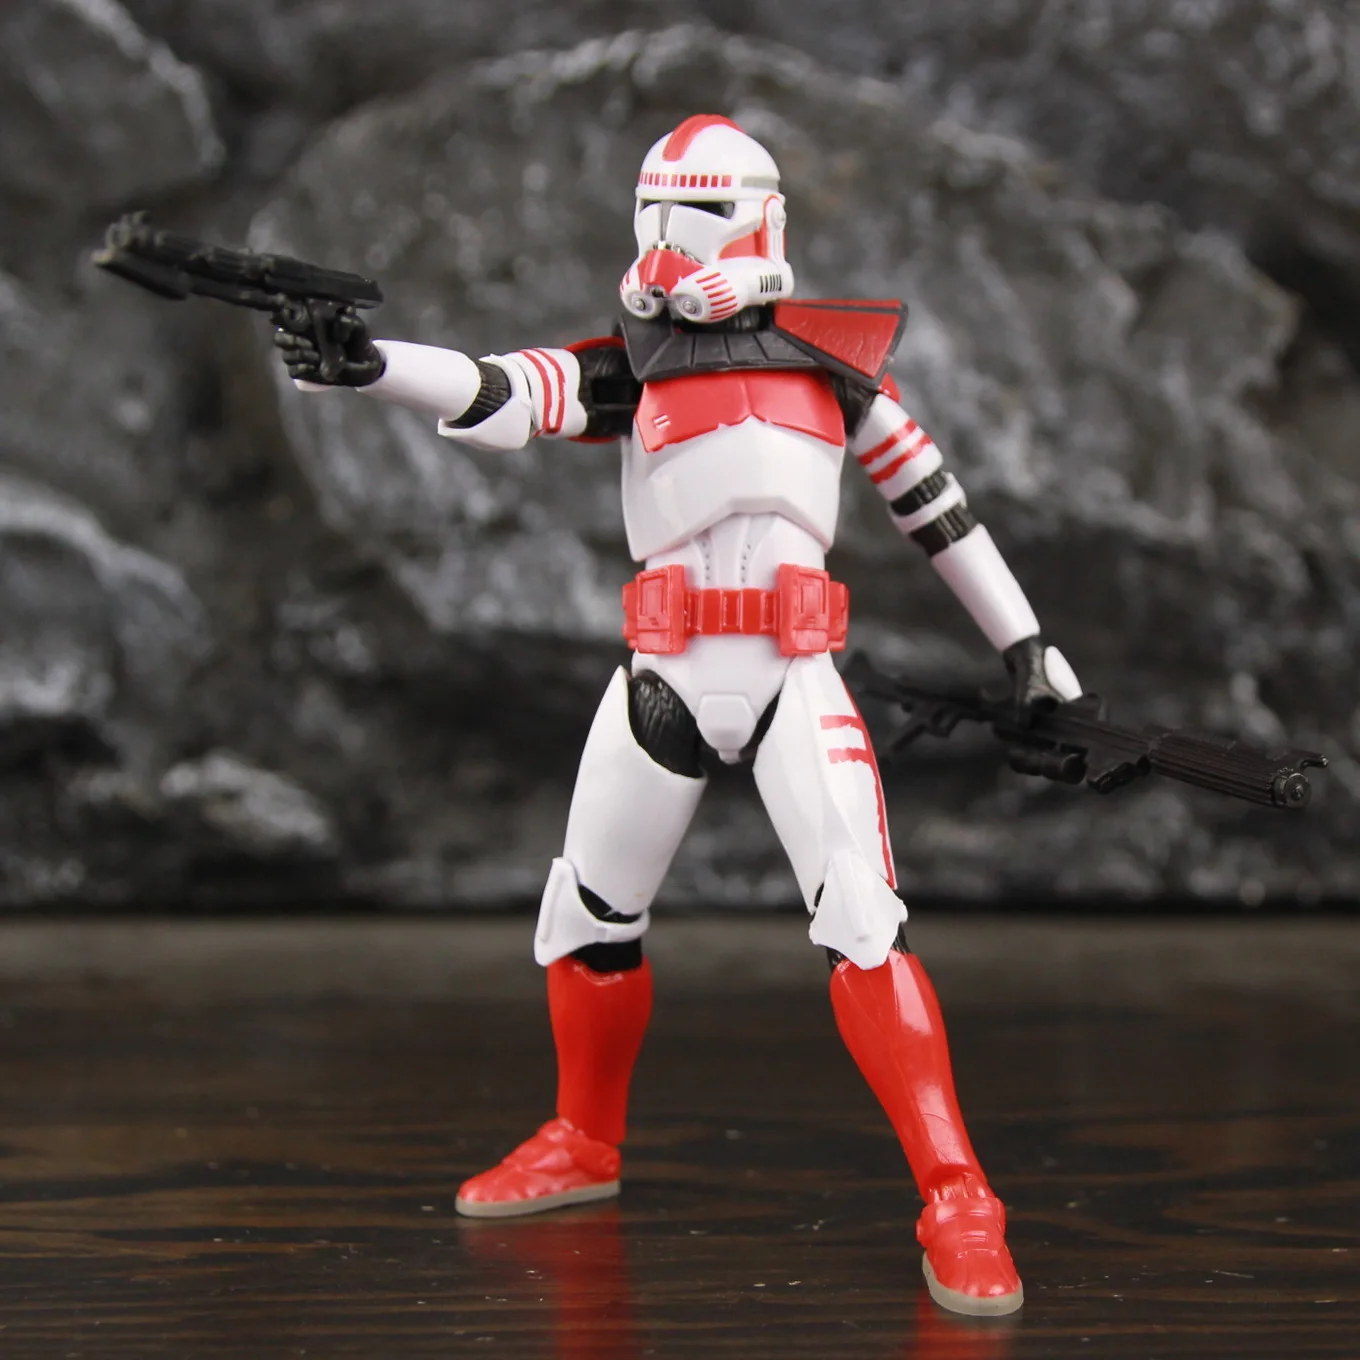 he man toys Starwars Attack Of The Clone Trooper 501st 212th Shock 6" Action Figure 332nd Asohka Clonetrooper Phase 2 Episode II Toys Model naruto toys